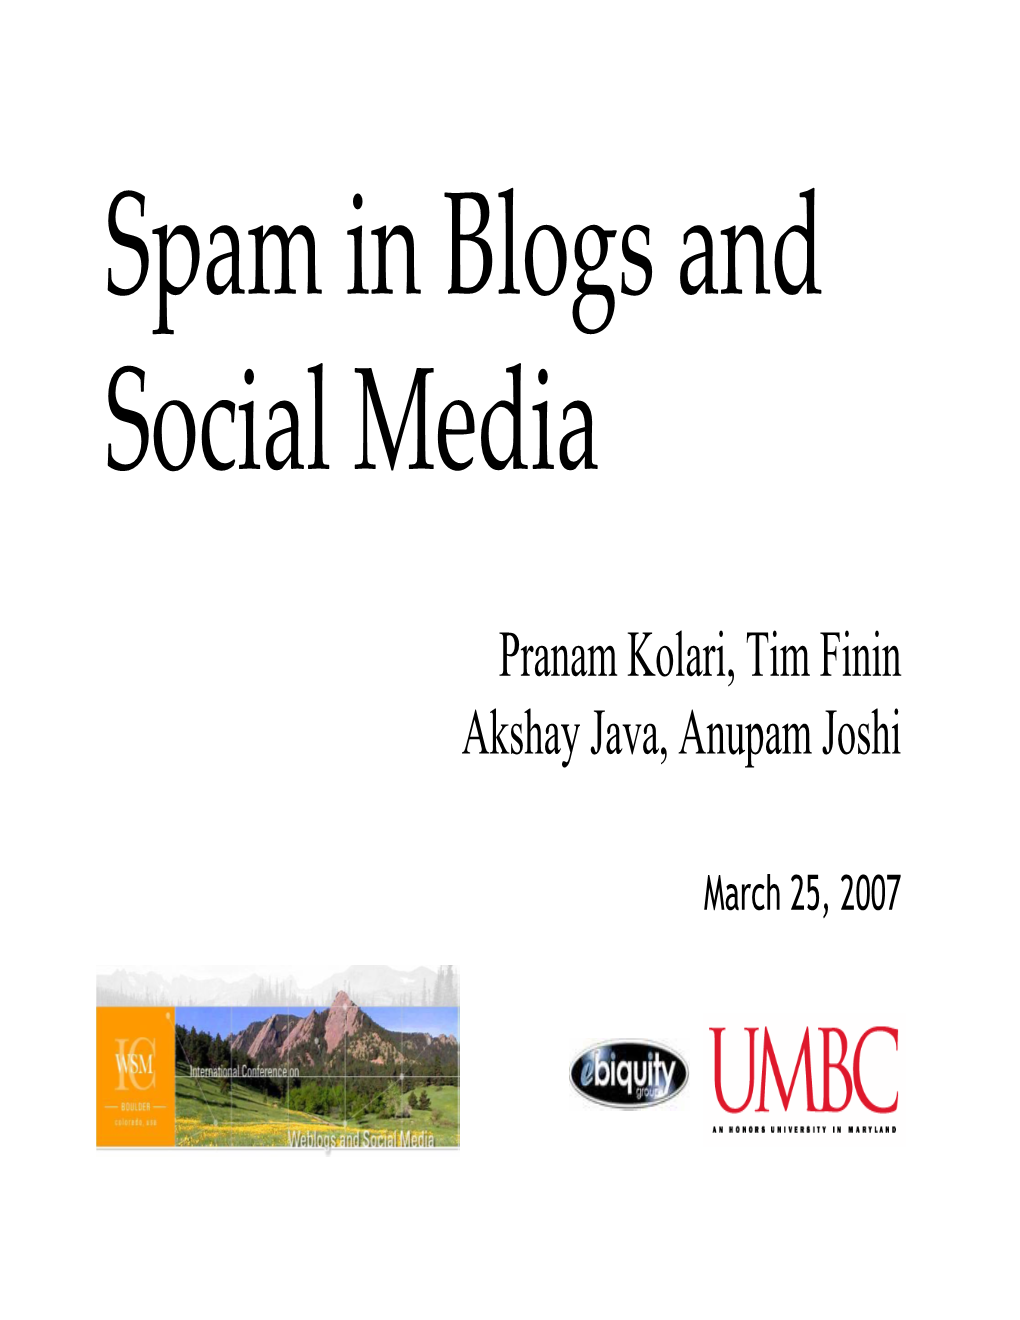 Spam in Blogs and Social Media